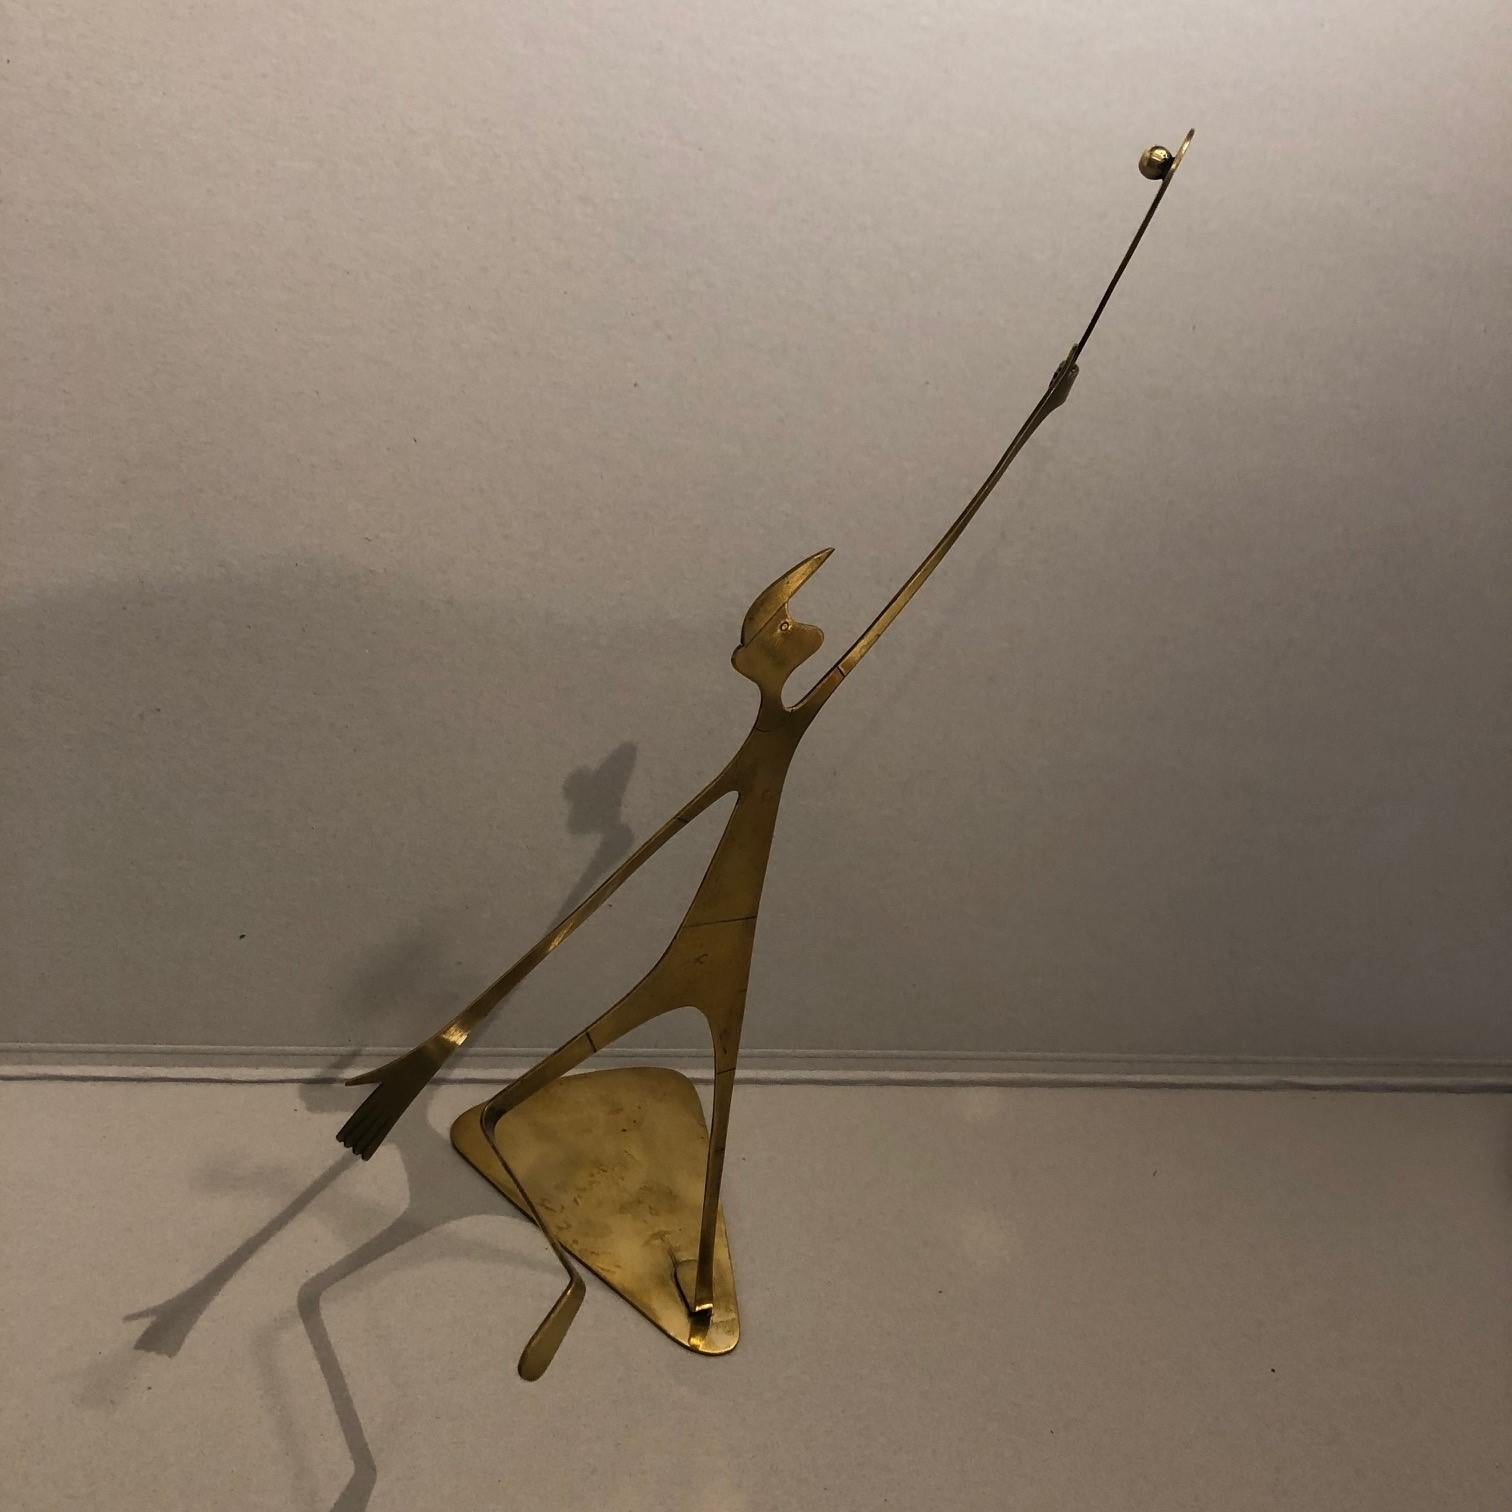 Amazing iconic Austrian Midcentury polished brass Tennis player sculpture designed by Franz Hagenauer and manufactured by Werkstätte Hagenauer Vienna in the 1950s. It is marked on the underside with Hagenauer Wien, WHW and FRANZ.
A must have for